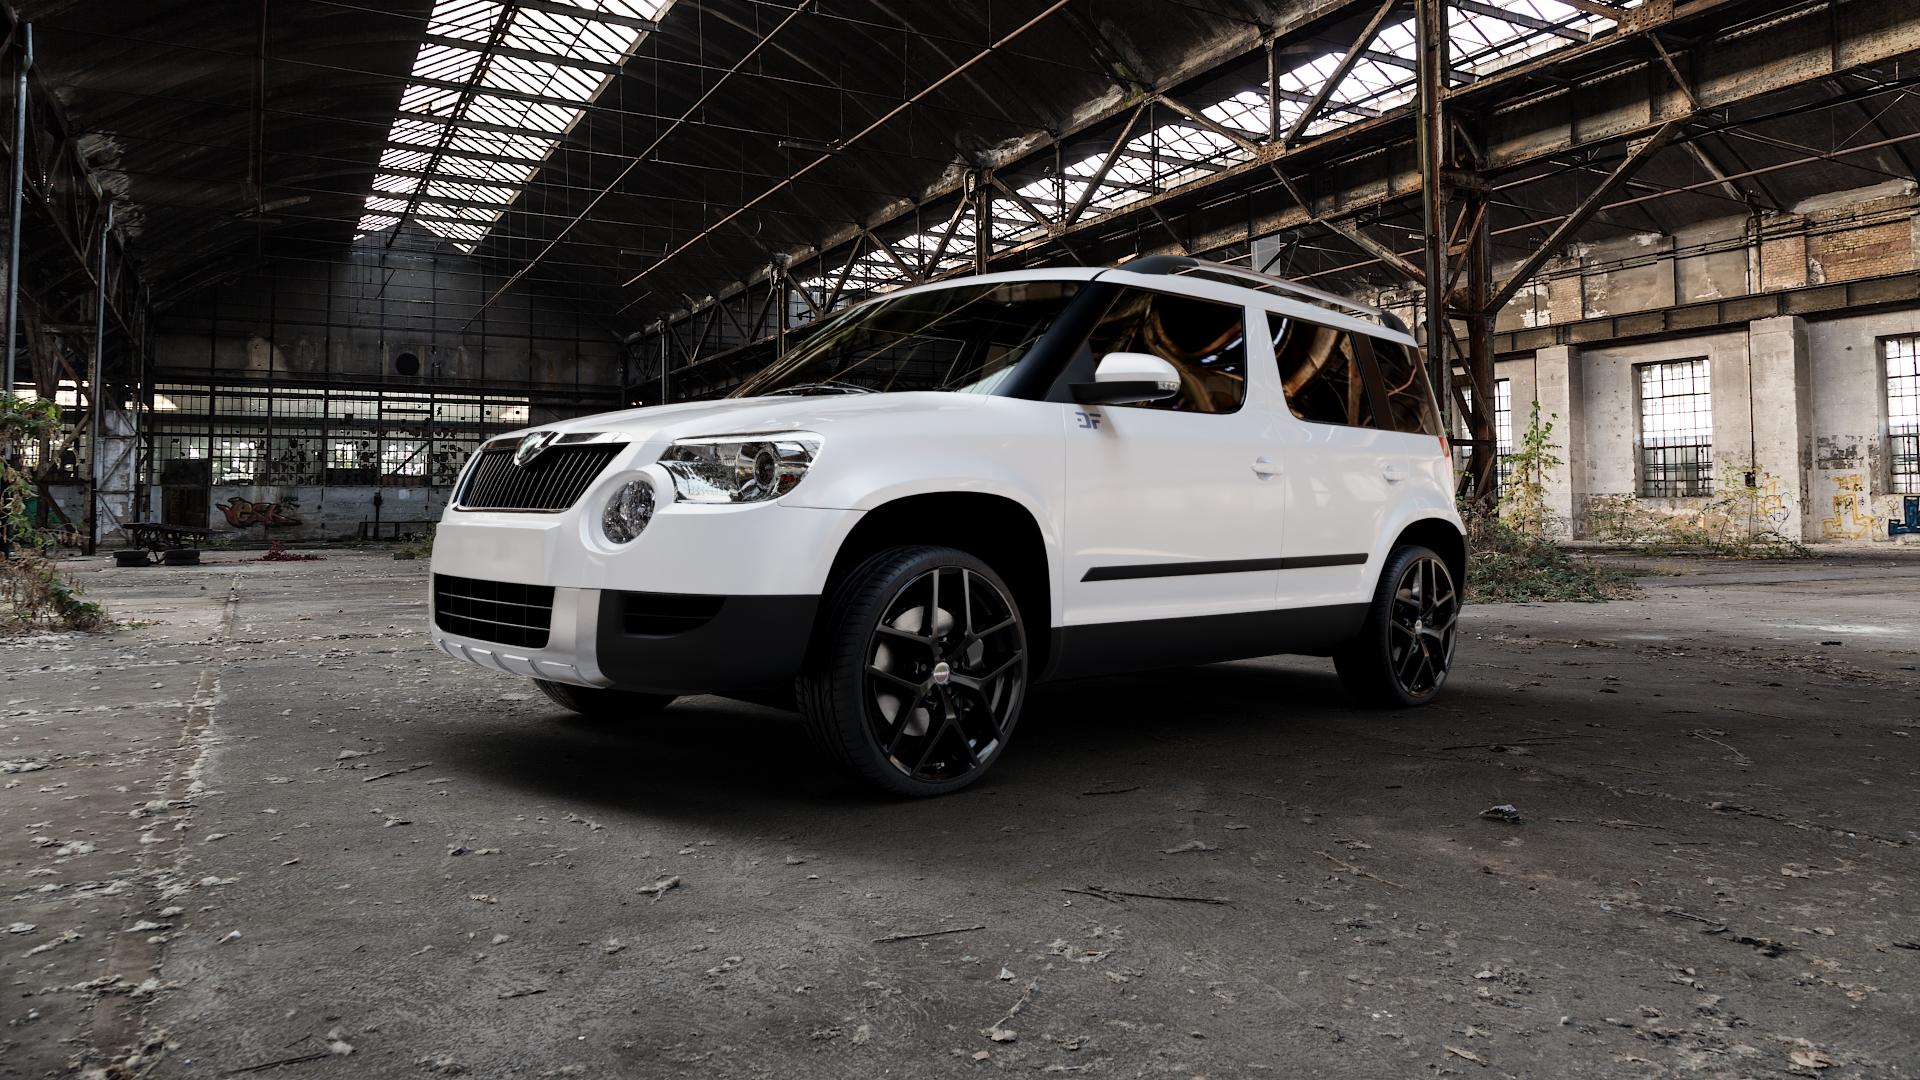 Skoda Yeti 1,8l TSI 4WD 118kW (160 hp) Wheels and Tyre Packages